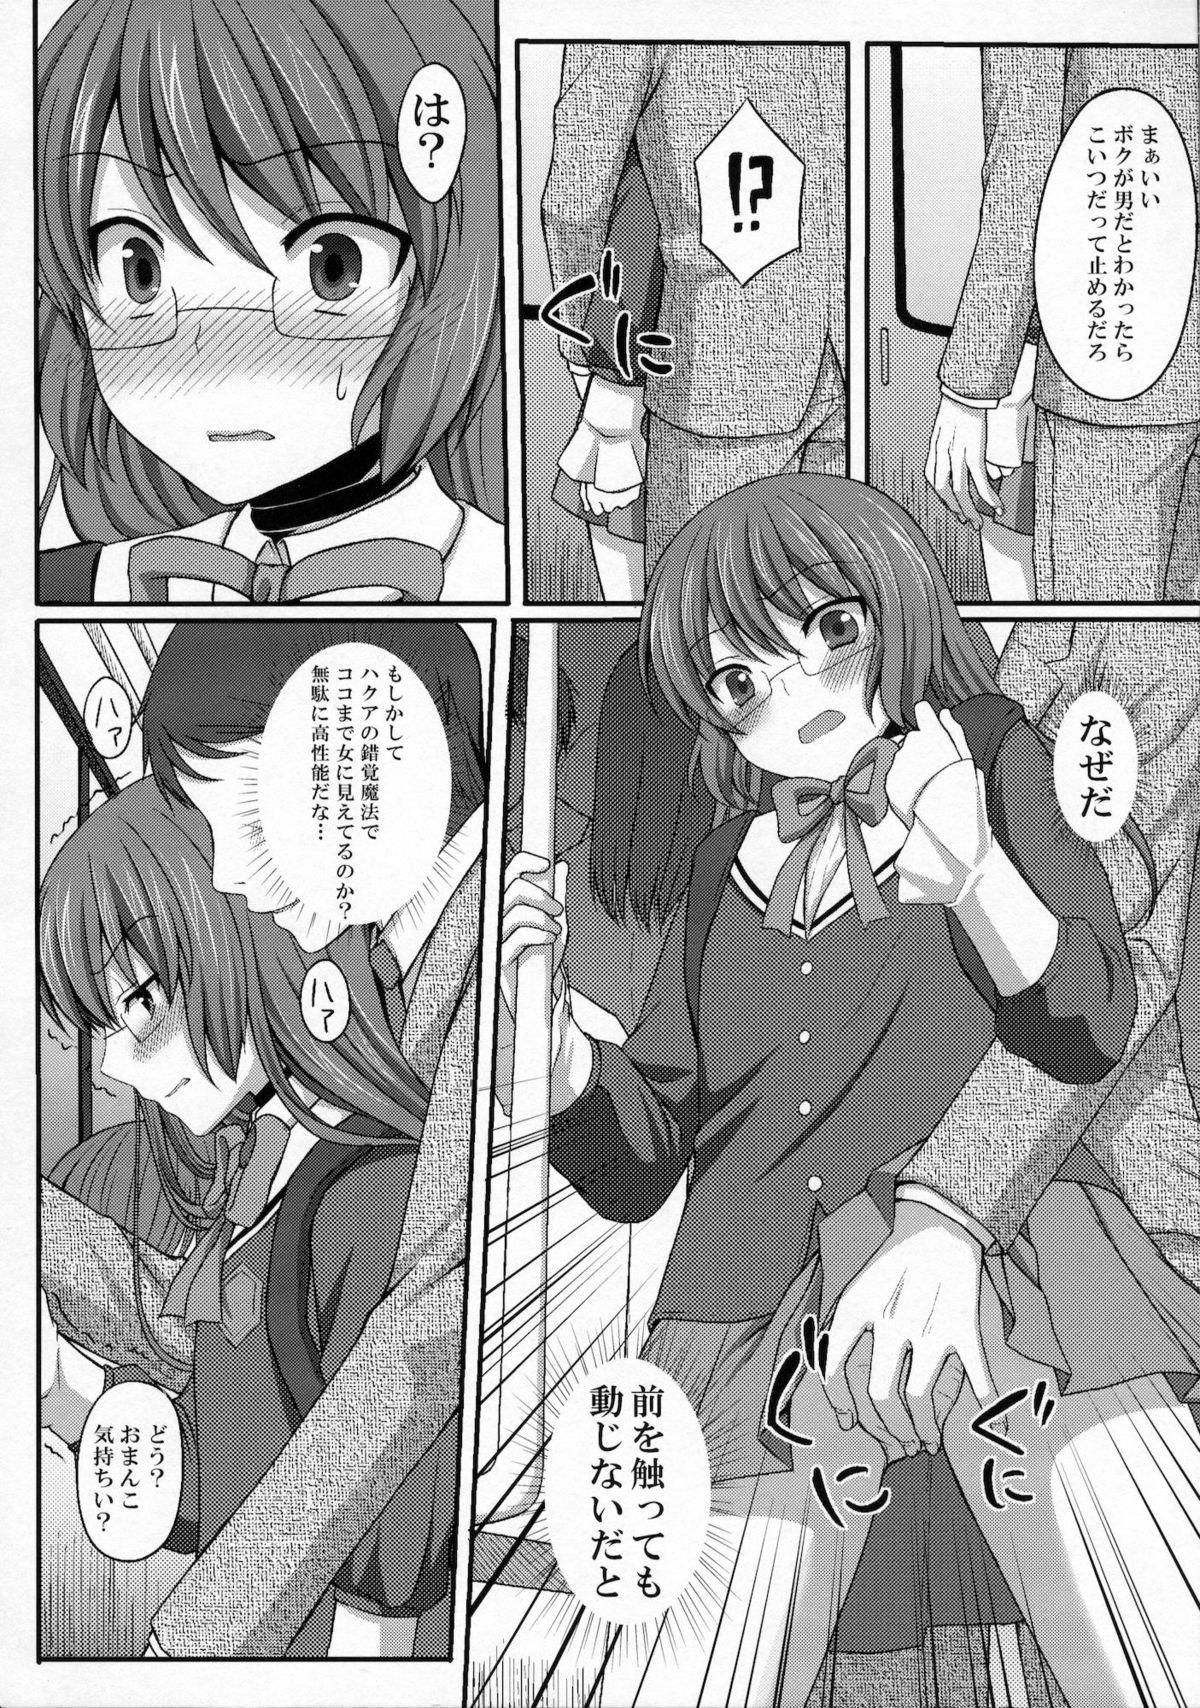 Roludo Kami-sama o Chikan - The world god only knows Teenies - Page 3